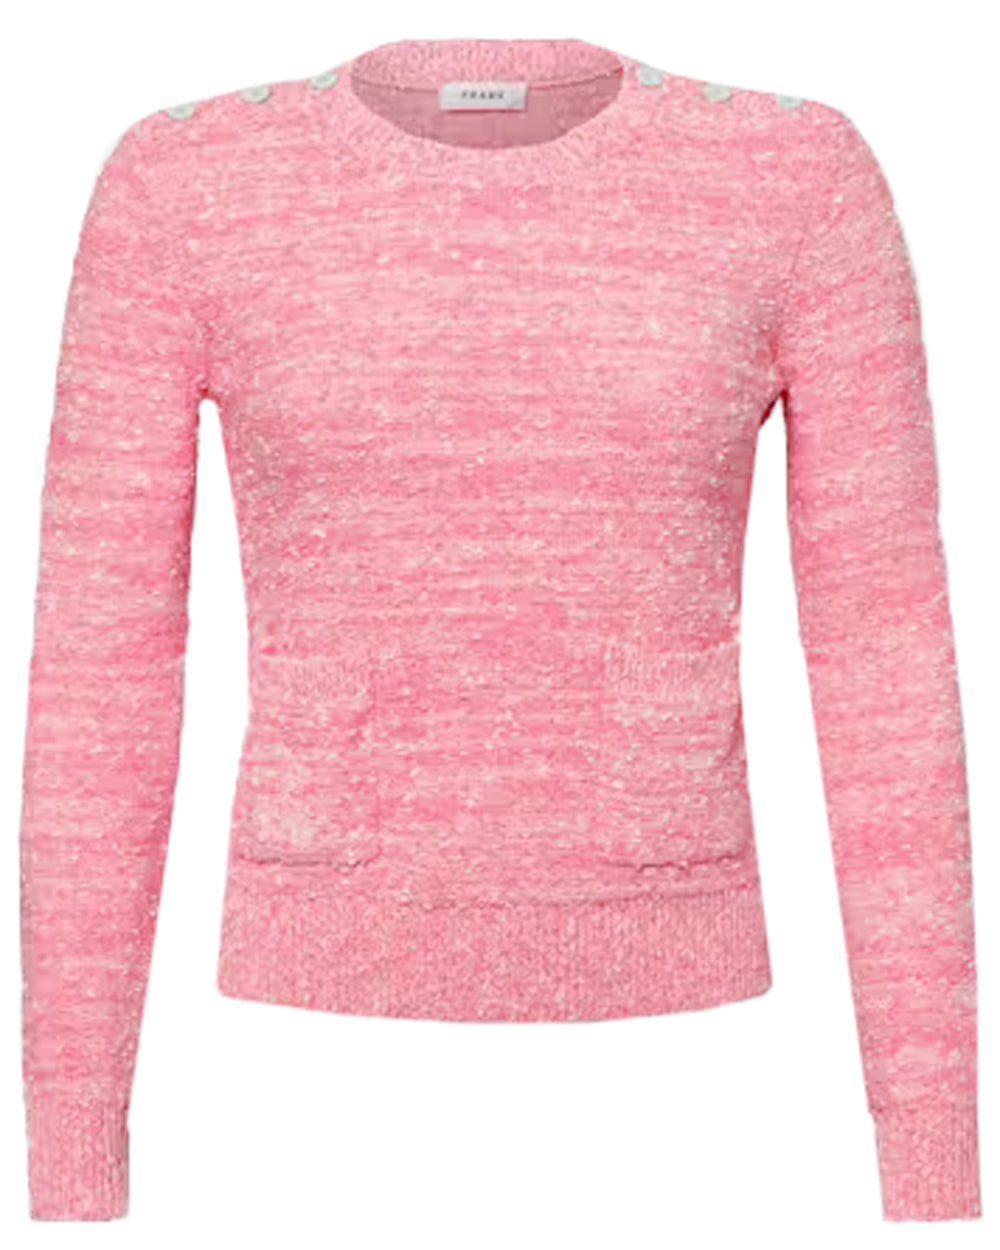 Pink Patch Pocket Sweater